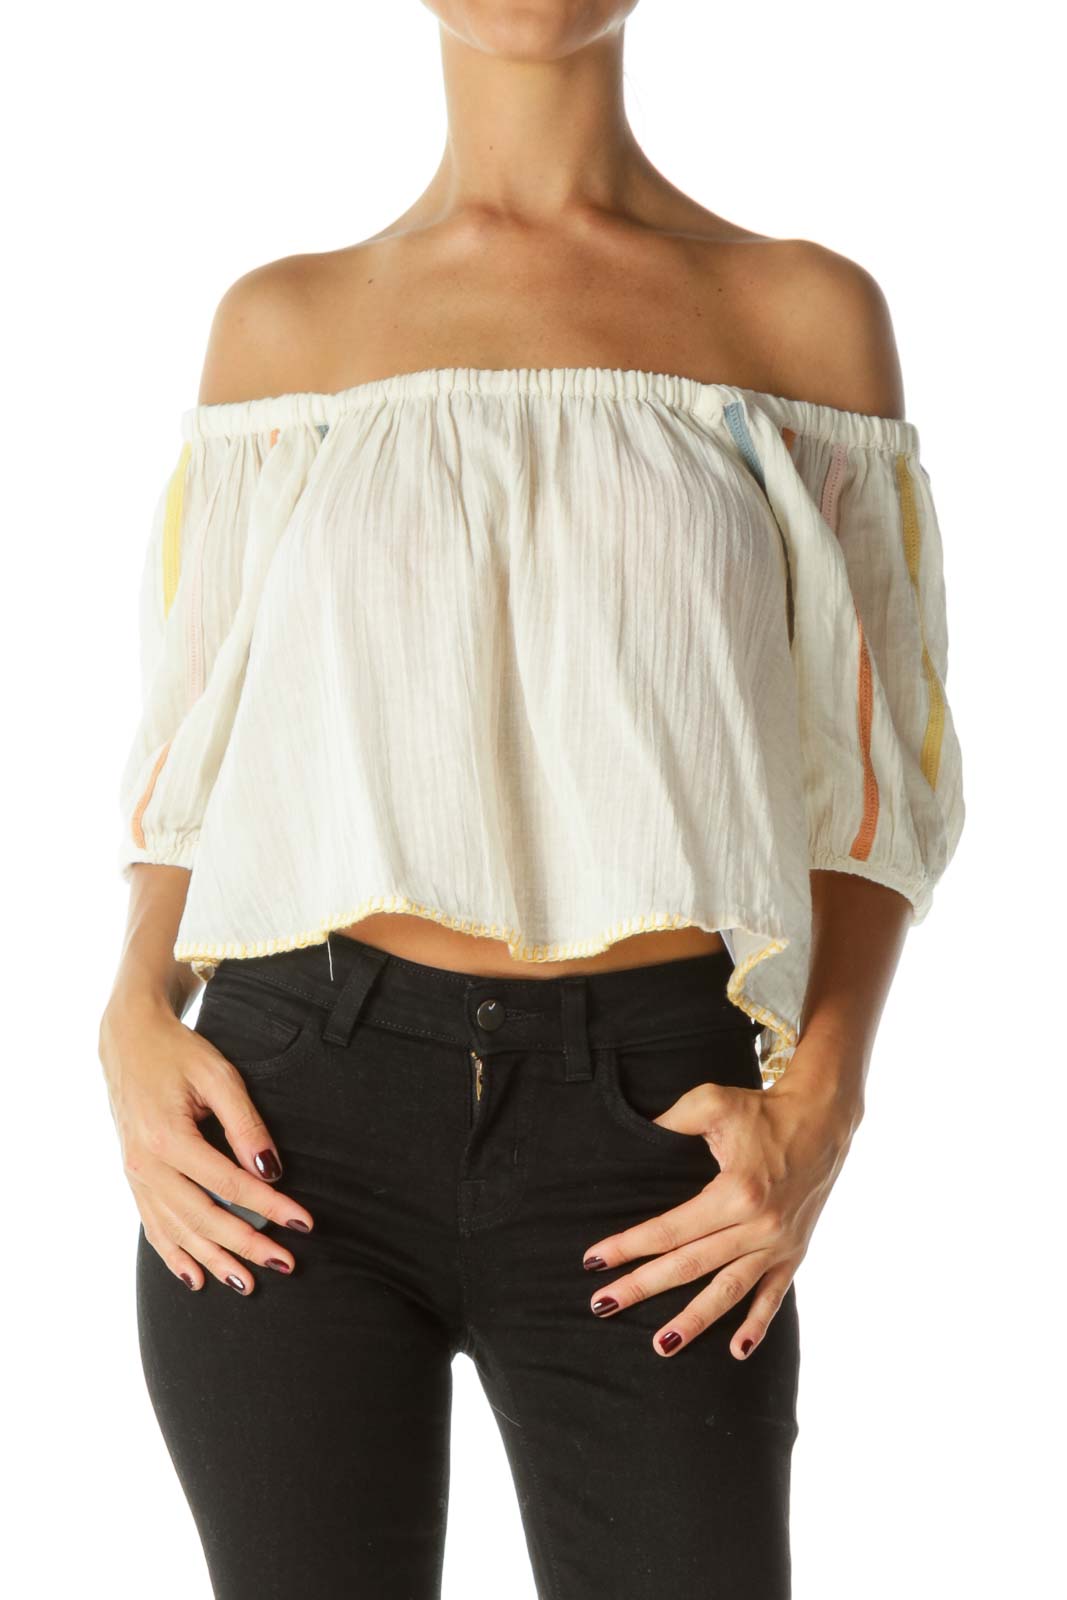 Cream Multicolored-Knit-Appliques and Trim Embroidery 100% Cotton Cold Shoulder Top Front